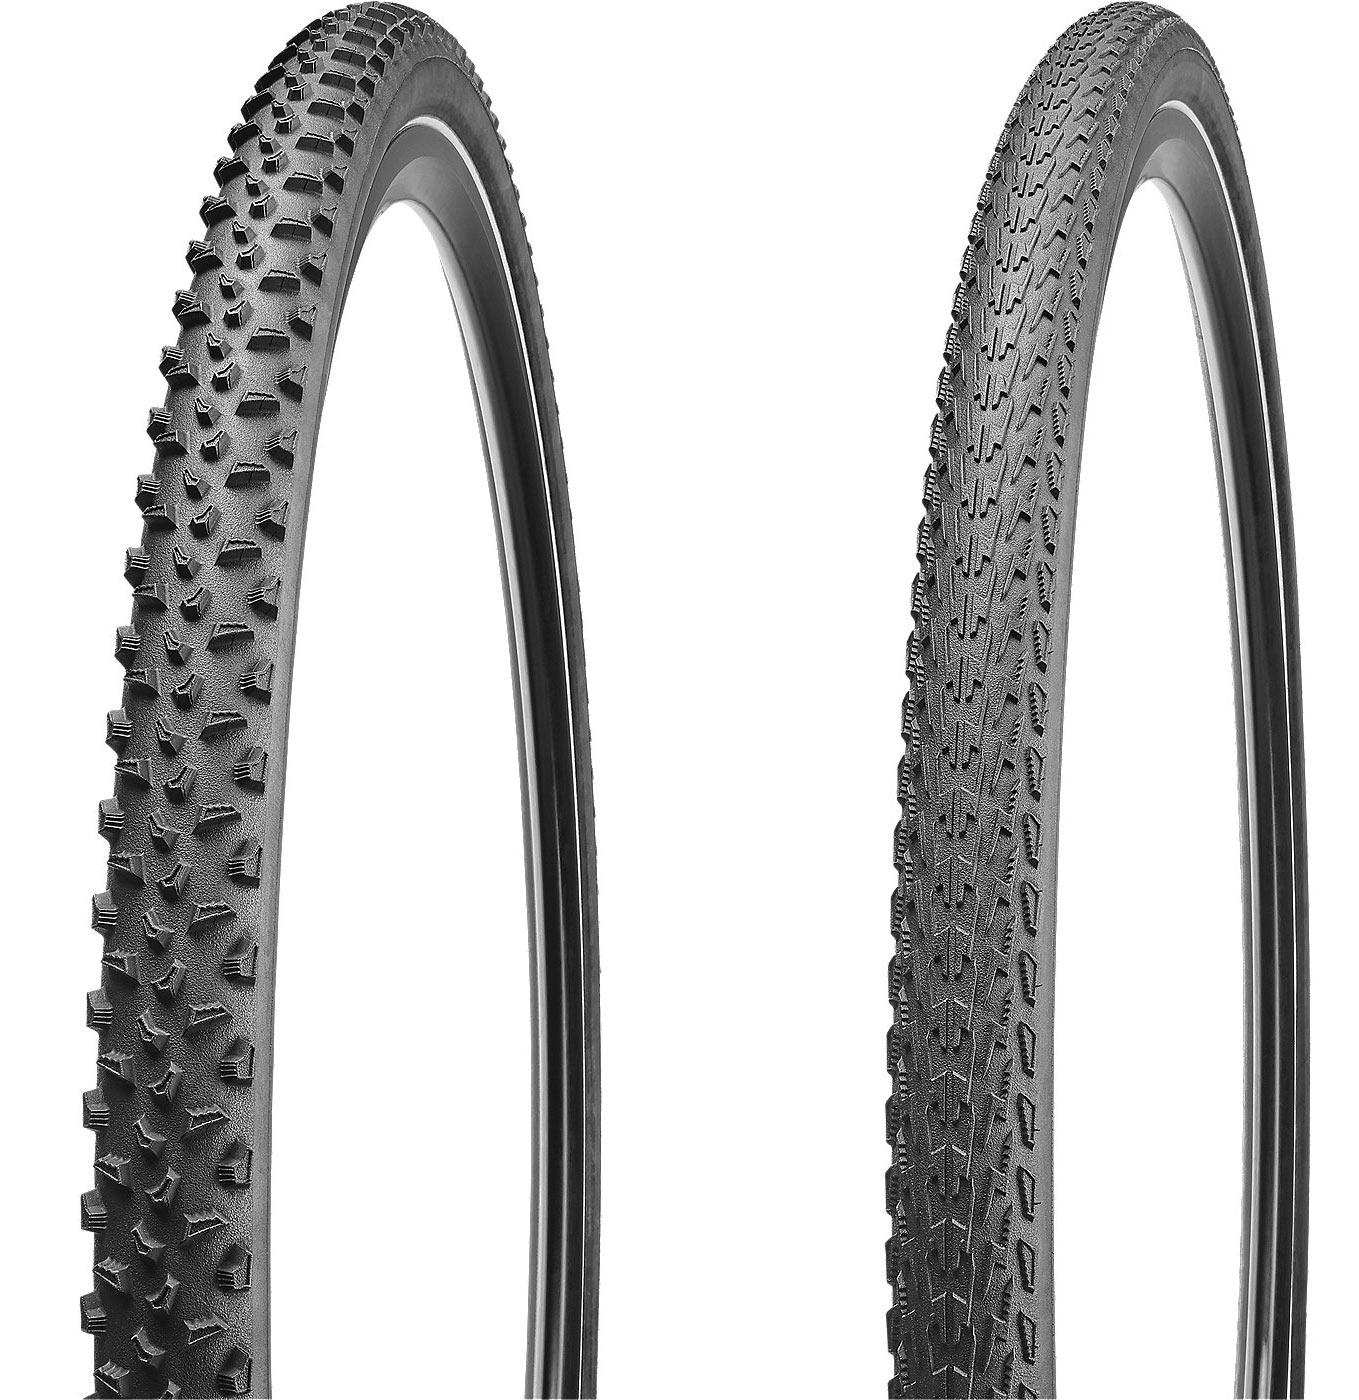 2018 Specialized Terra Pro and Tracer Pro cyclocross tires with silica Gripton rubber compound